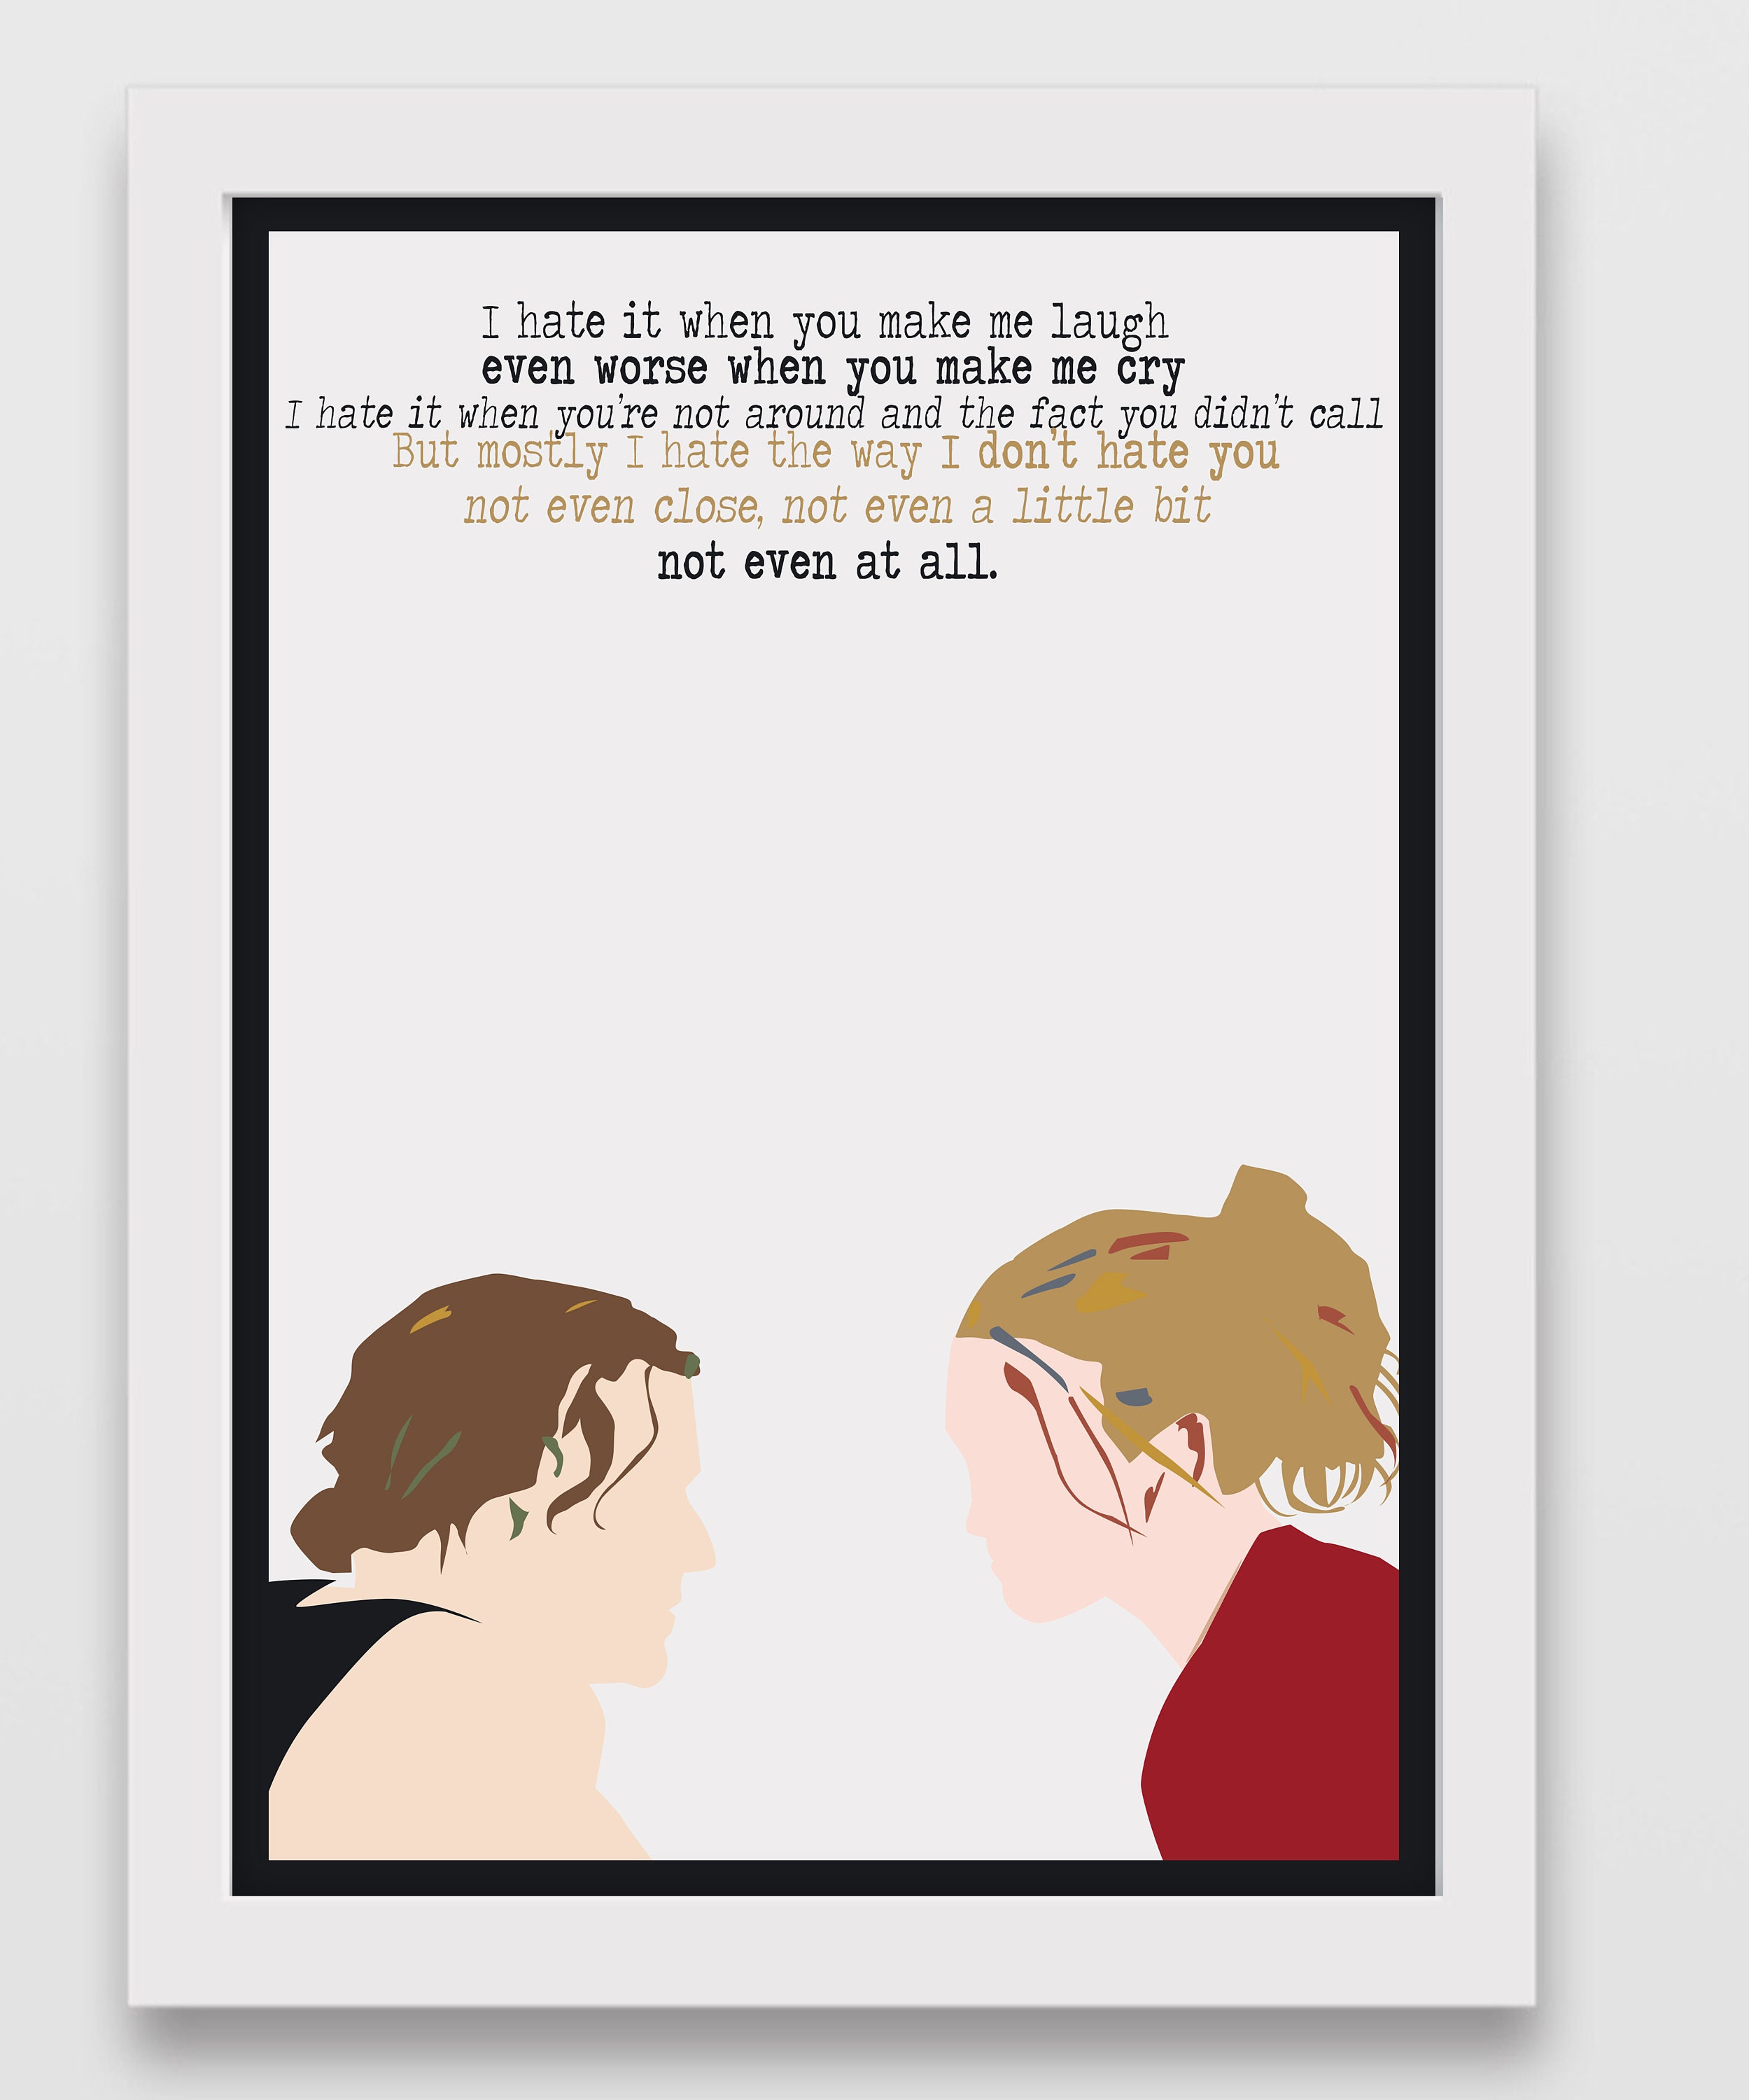 Chungkong Minimal Movie Poster '10 Things I Hate About You' Graphic Art Print on Canvas East Urban Home Size: 40 H x 26 W x 1.5 D, Format: Wrapped